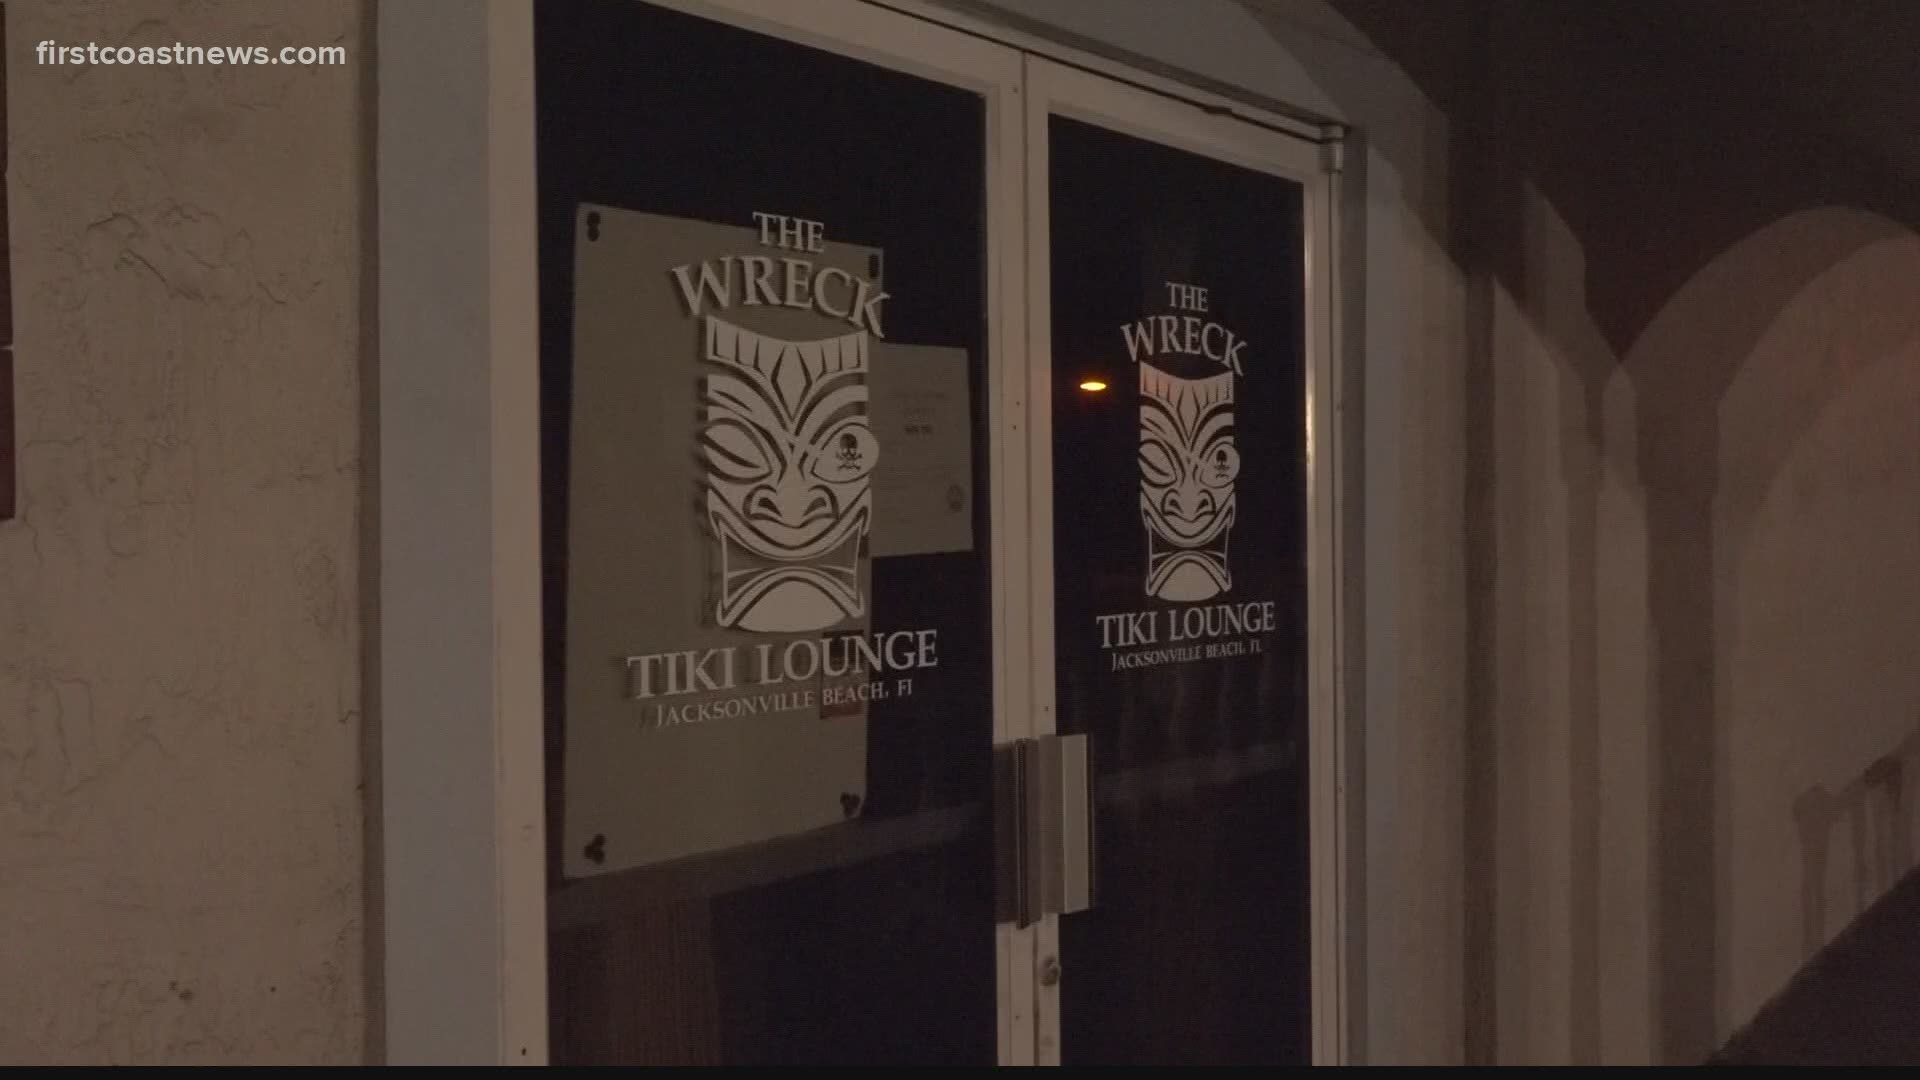 Fernando M. Meza, the owner of The Tavern on 1st and The Wreck Tiki Bar, announced the closure of both bars over the next few days.